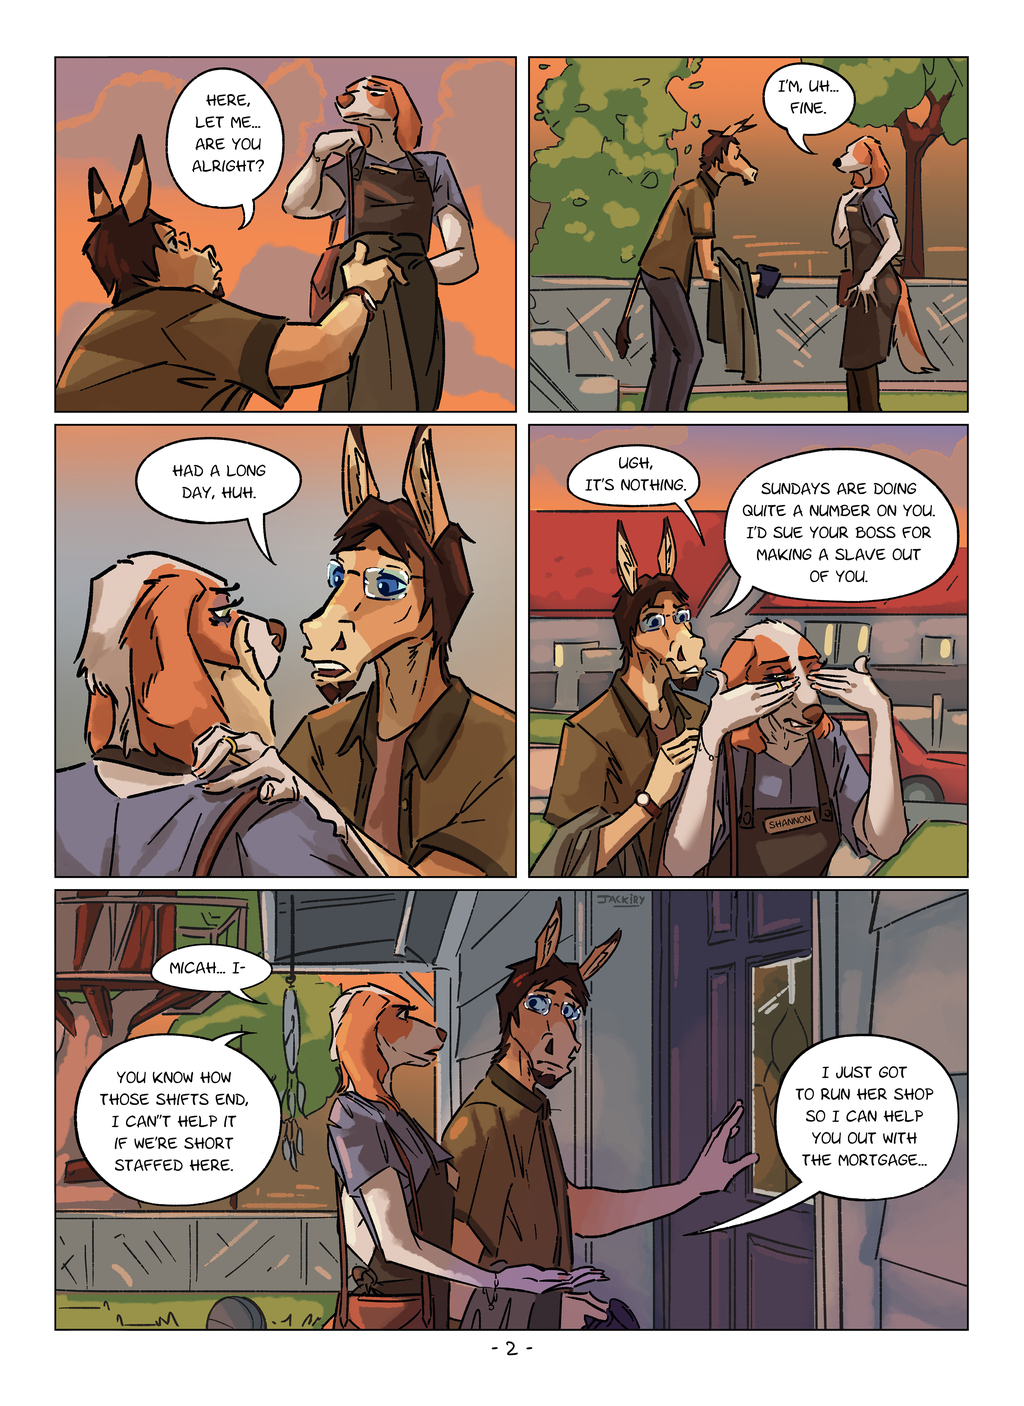 End of Shift - page 2